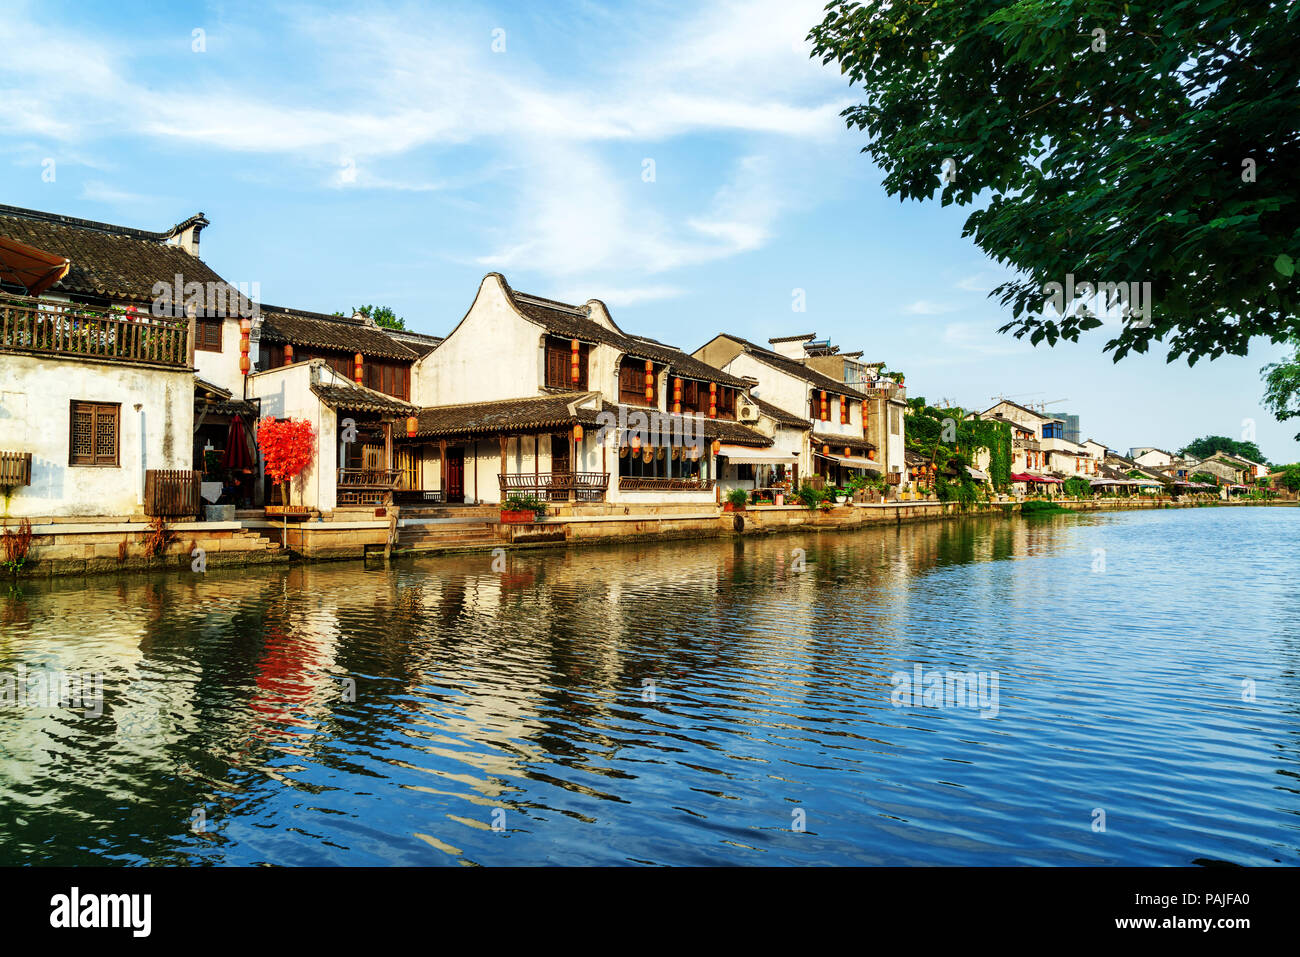 Wuxi, a famous water town in China Stock Photo